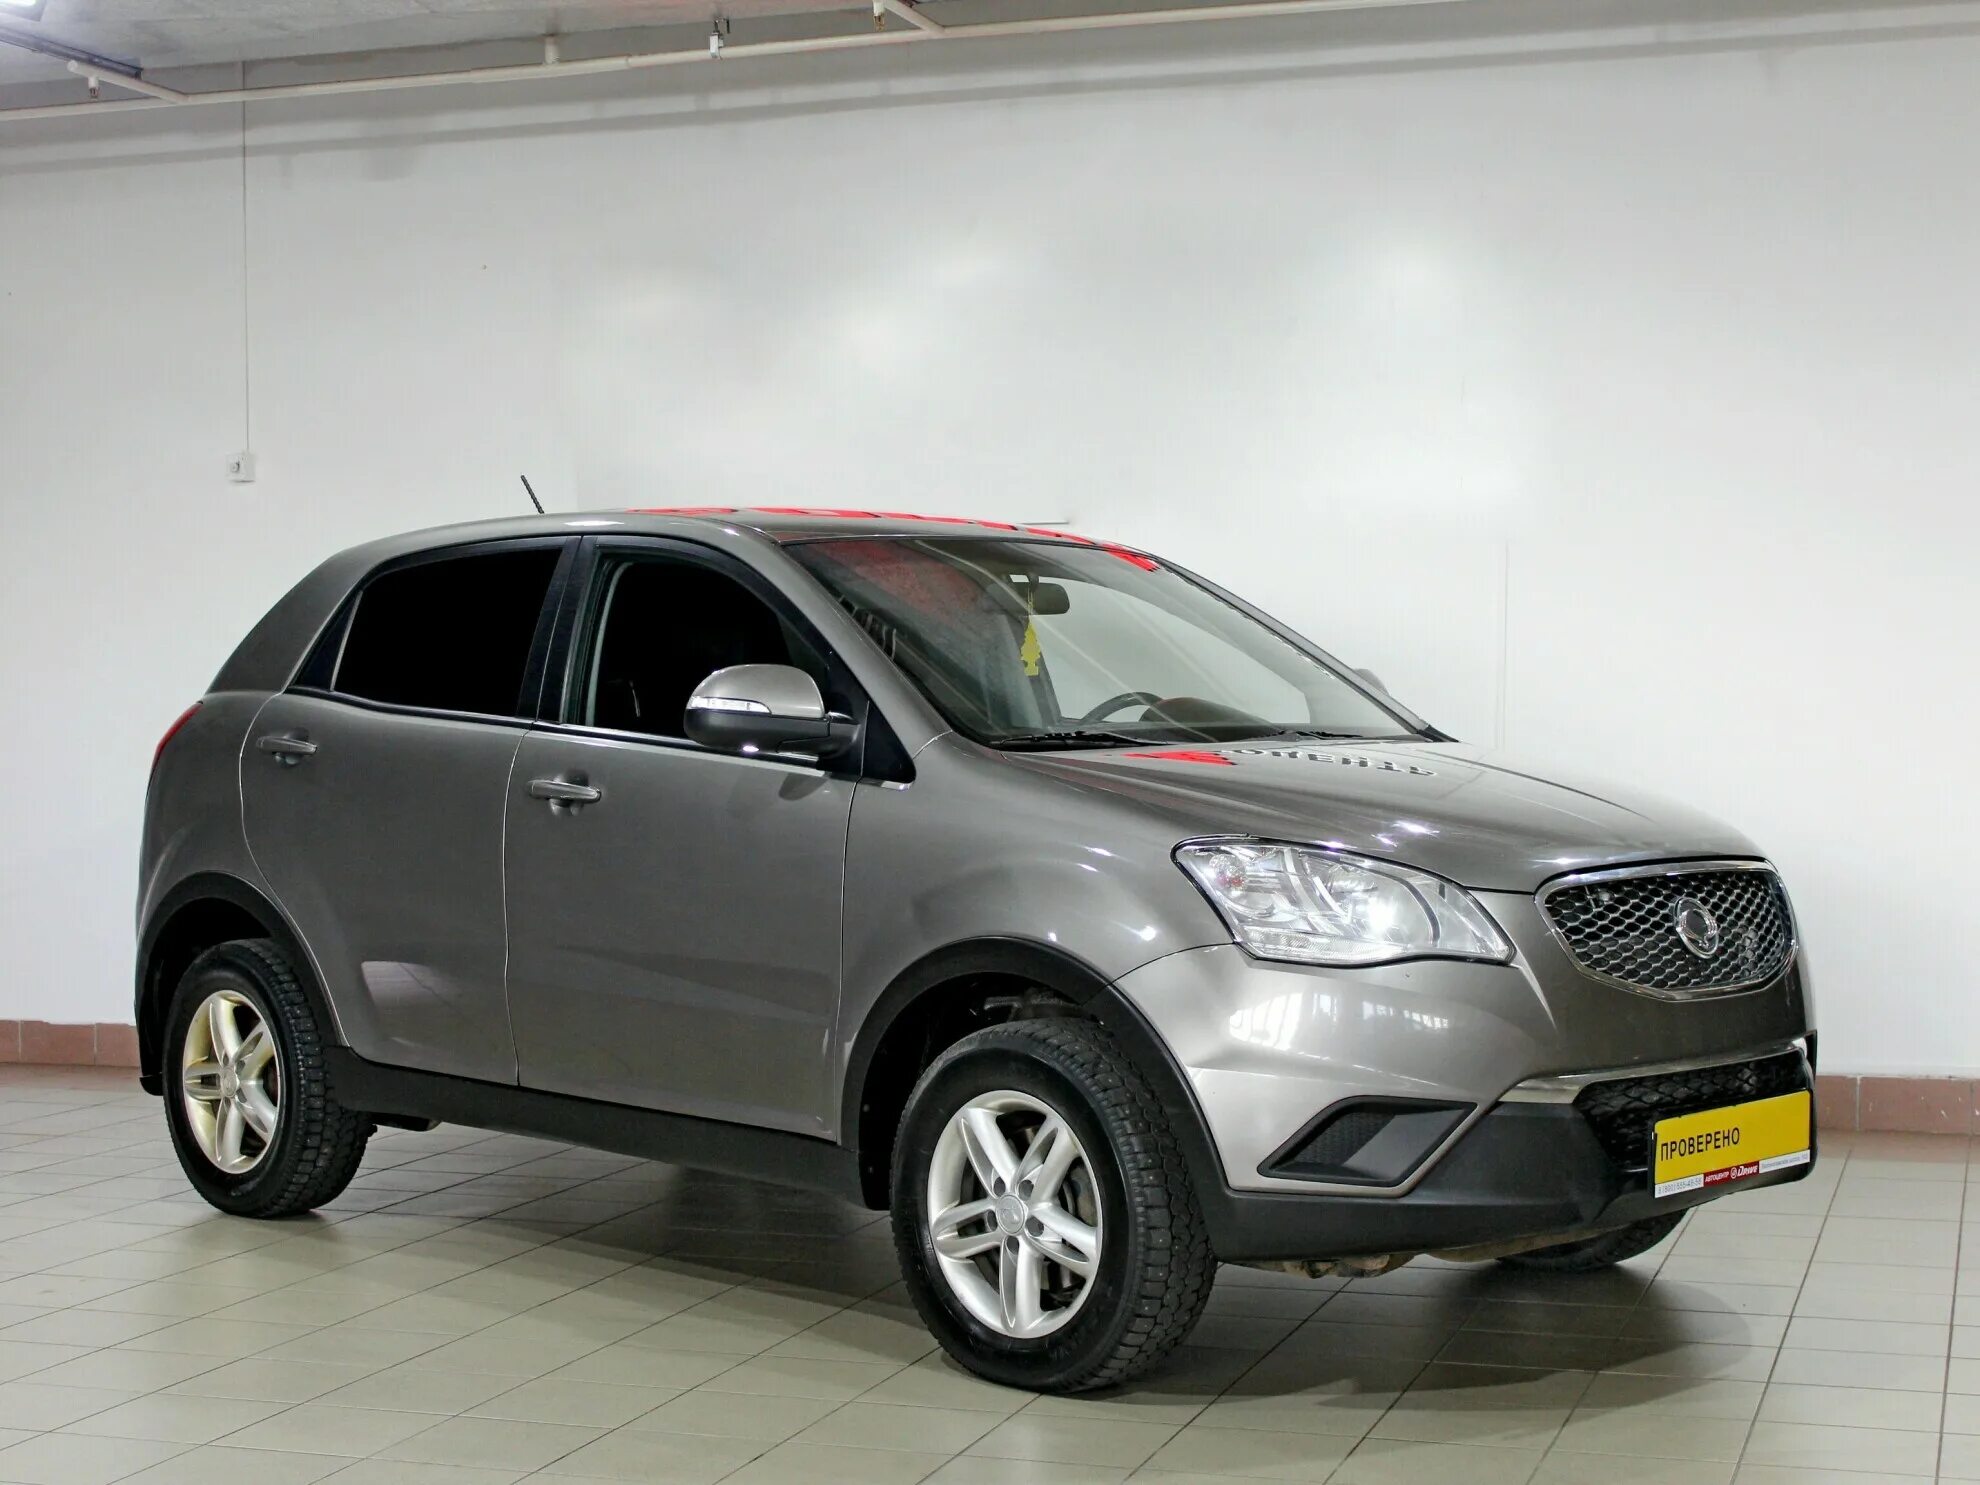 SSANGYONG Actyon 2010. SSANGYONG Actyon 2011. Санг енг Actyon 2010. Саньенг Актион 2 2010 года.